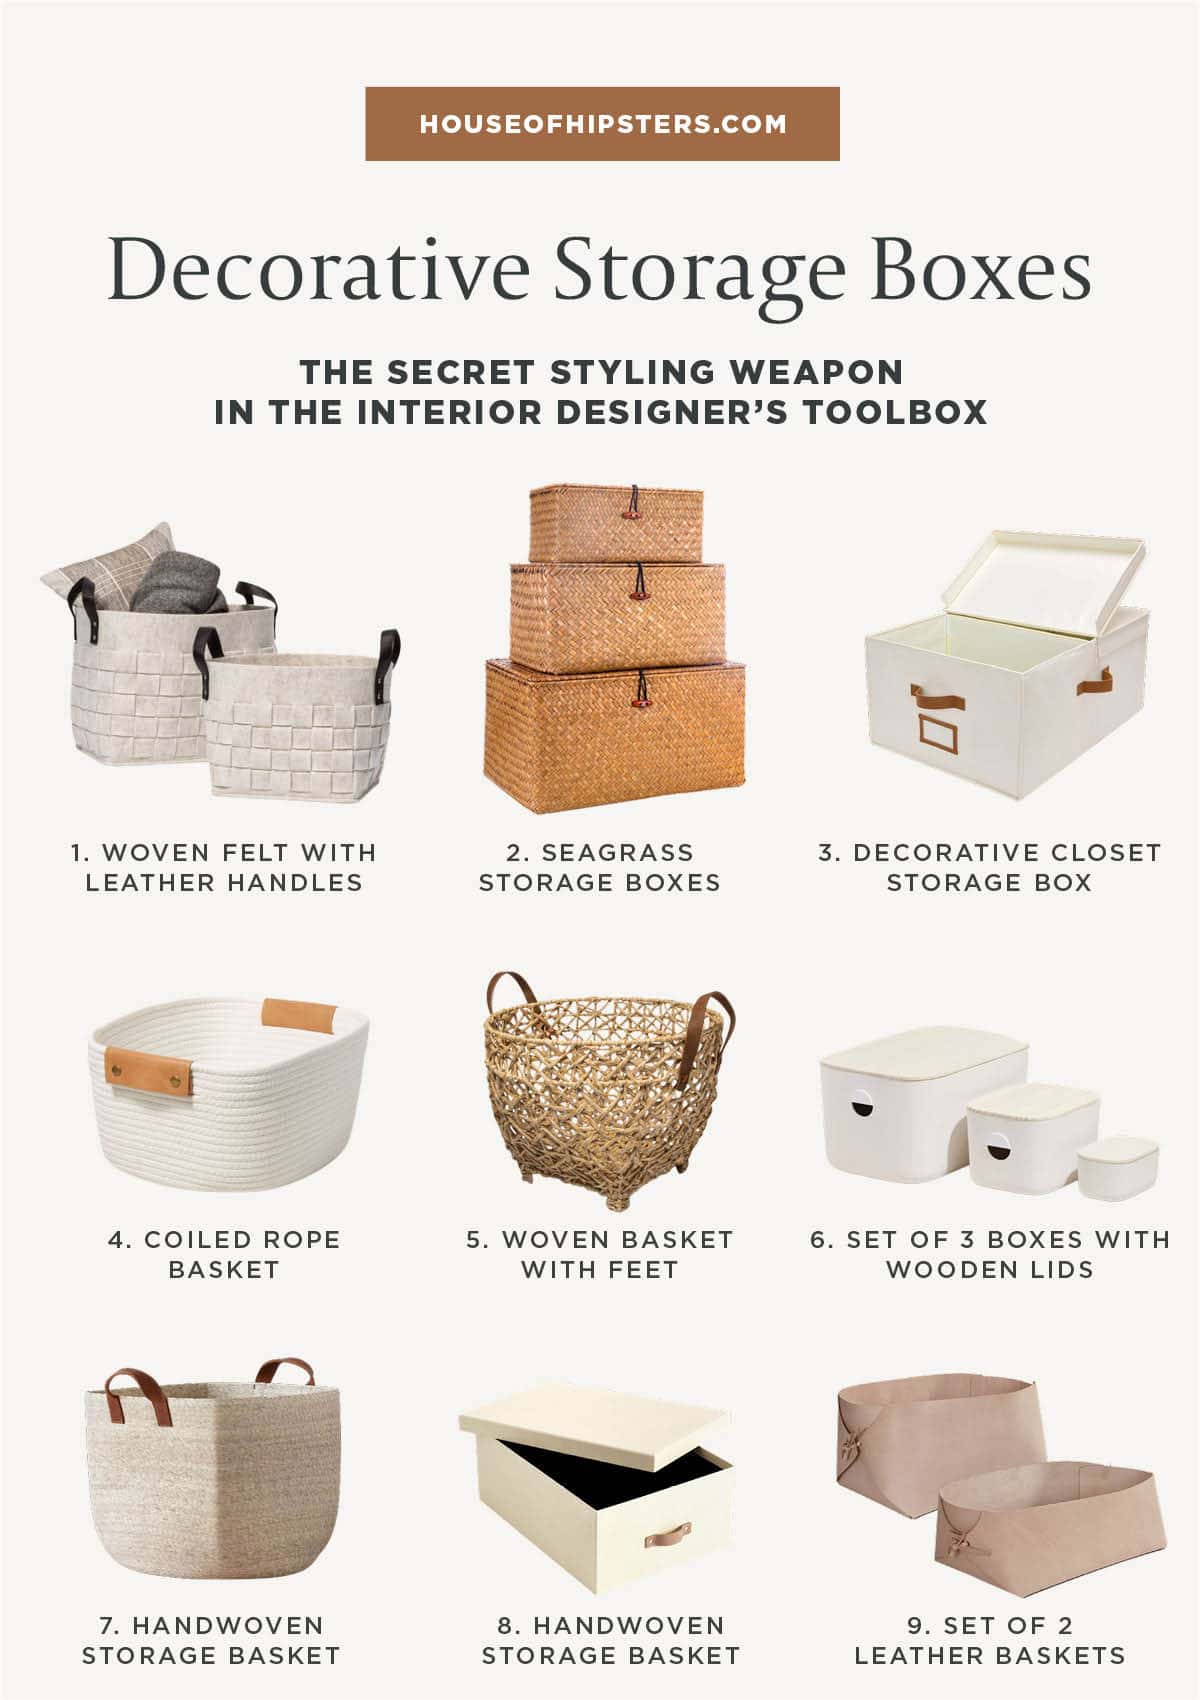 27 Decorative Boxes Your Inner Decorator Will Love - House Of Hipsters